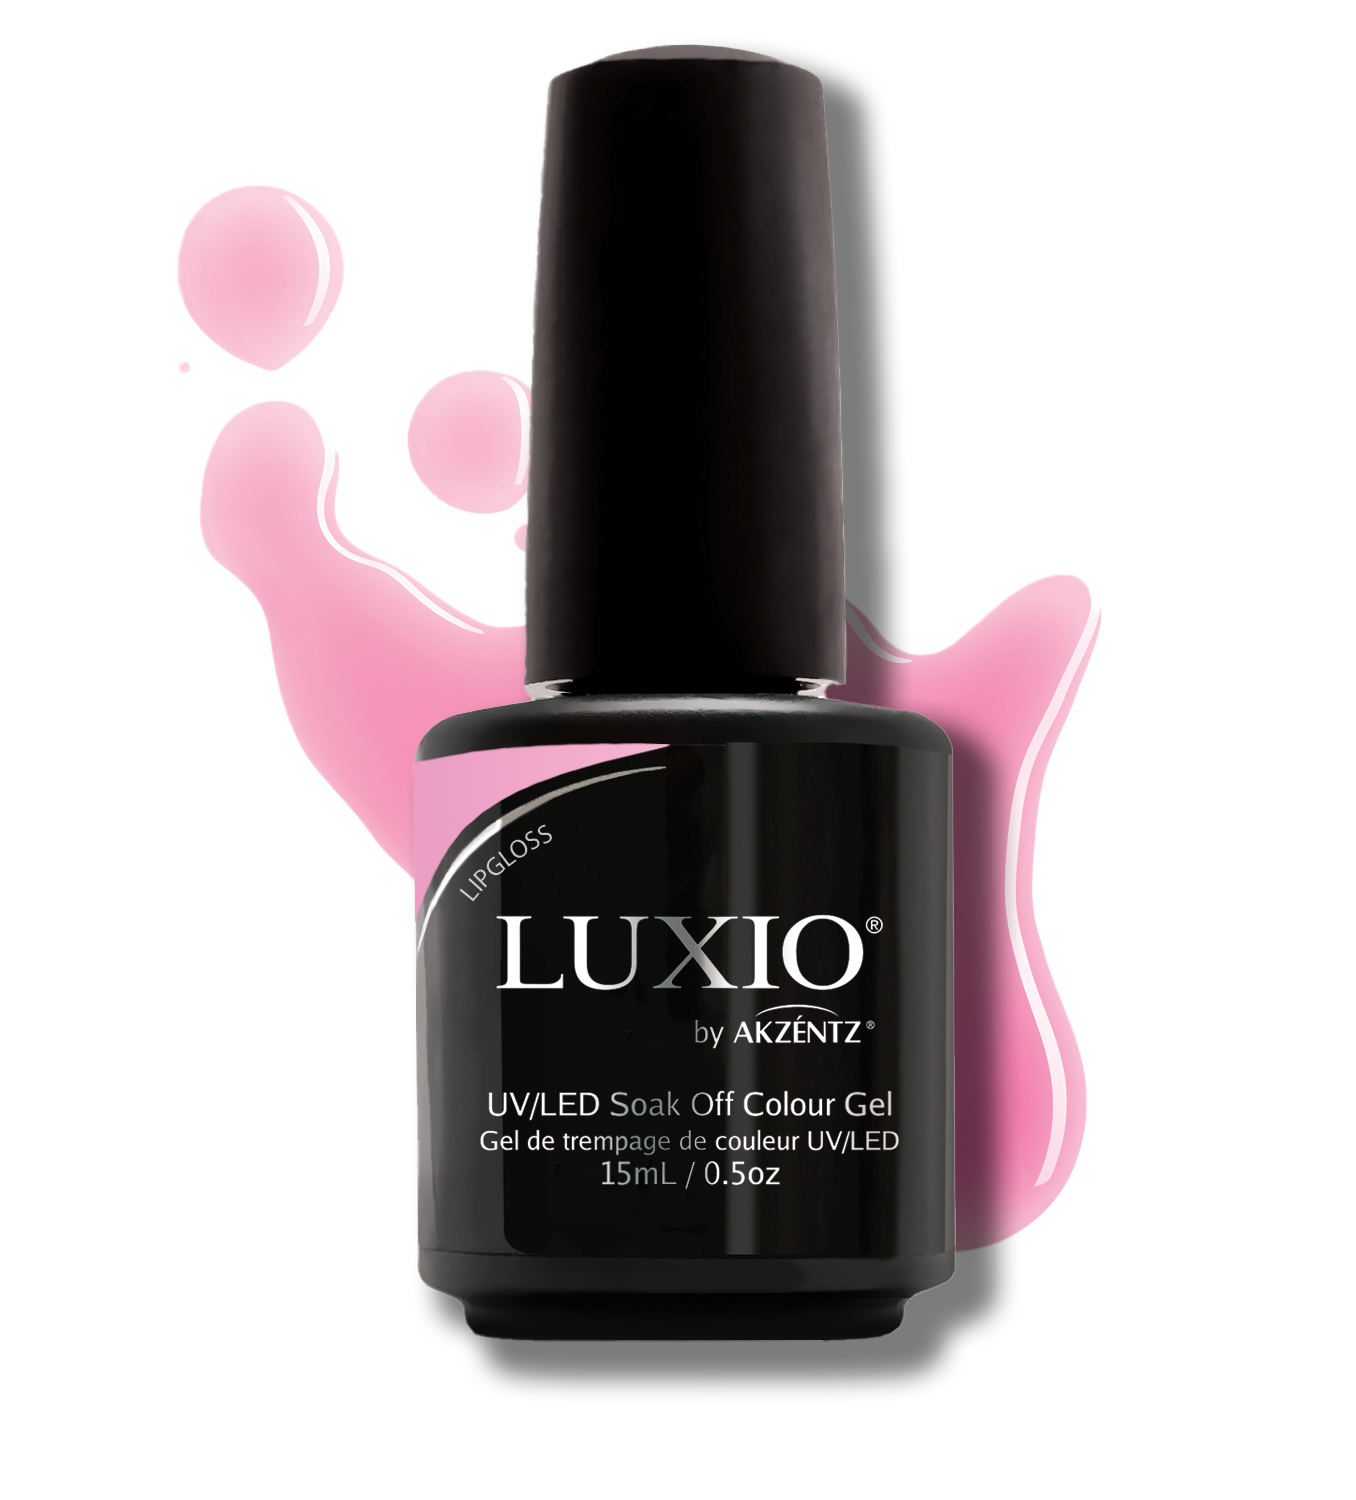 Luxio Paradiso Collection - FULL SIZE and MINI